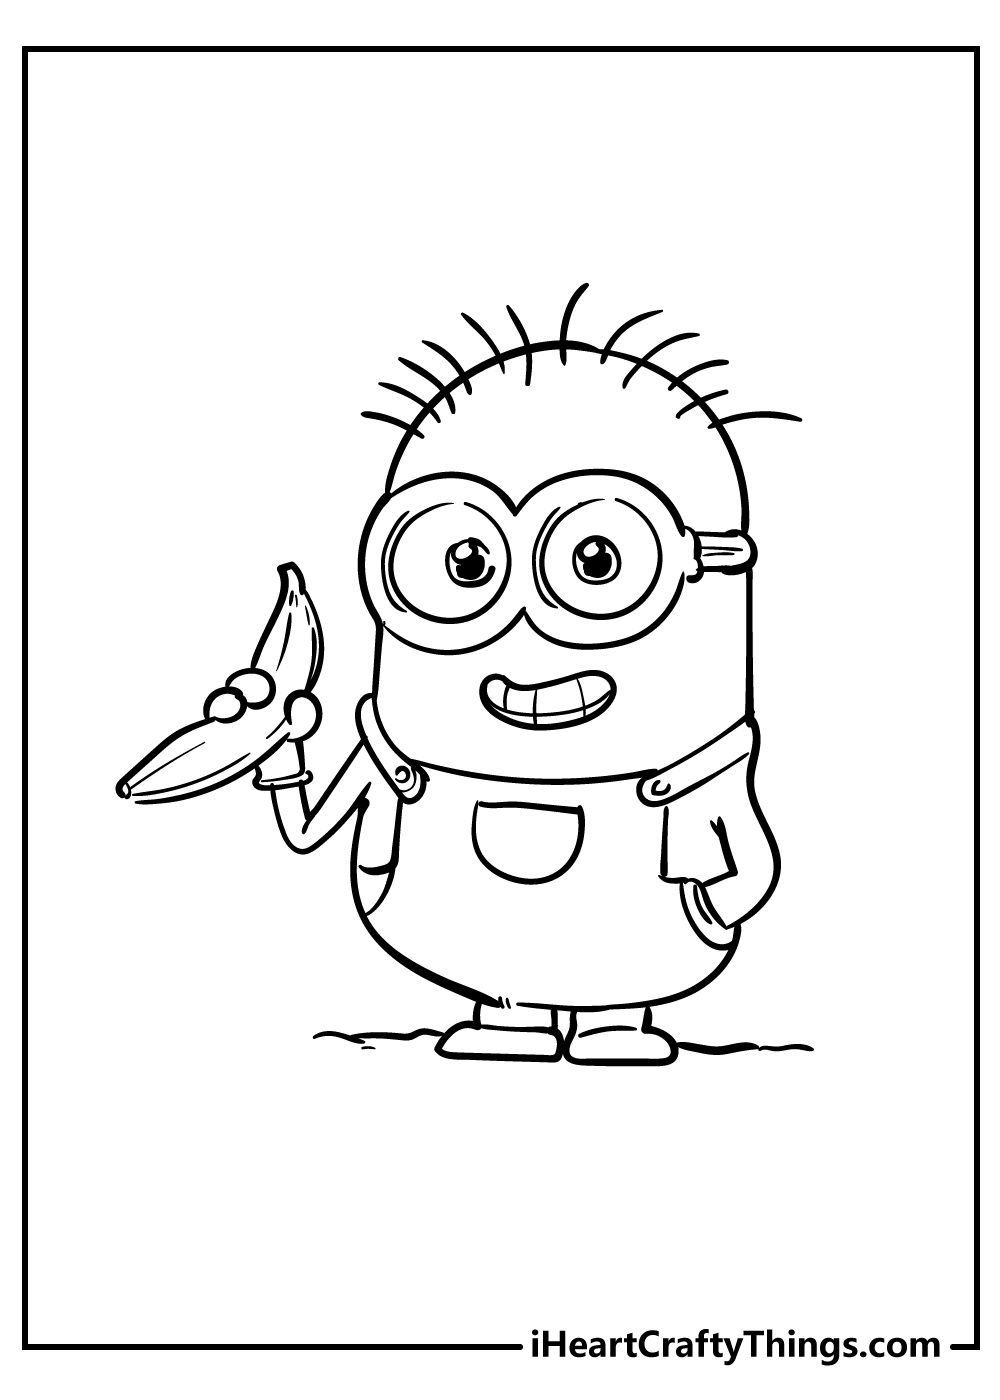 Minions Coloring Book for kids free printable